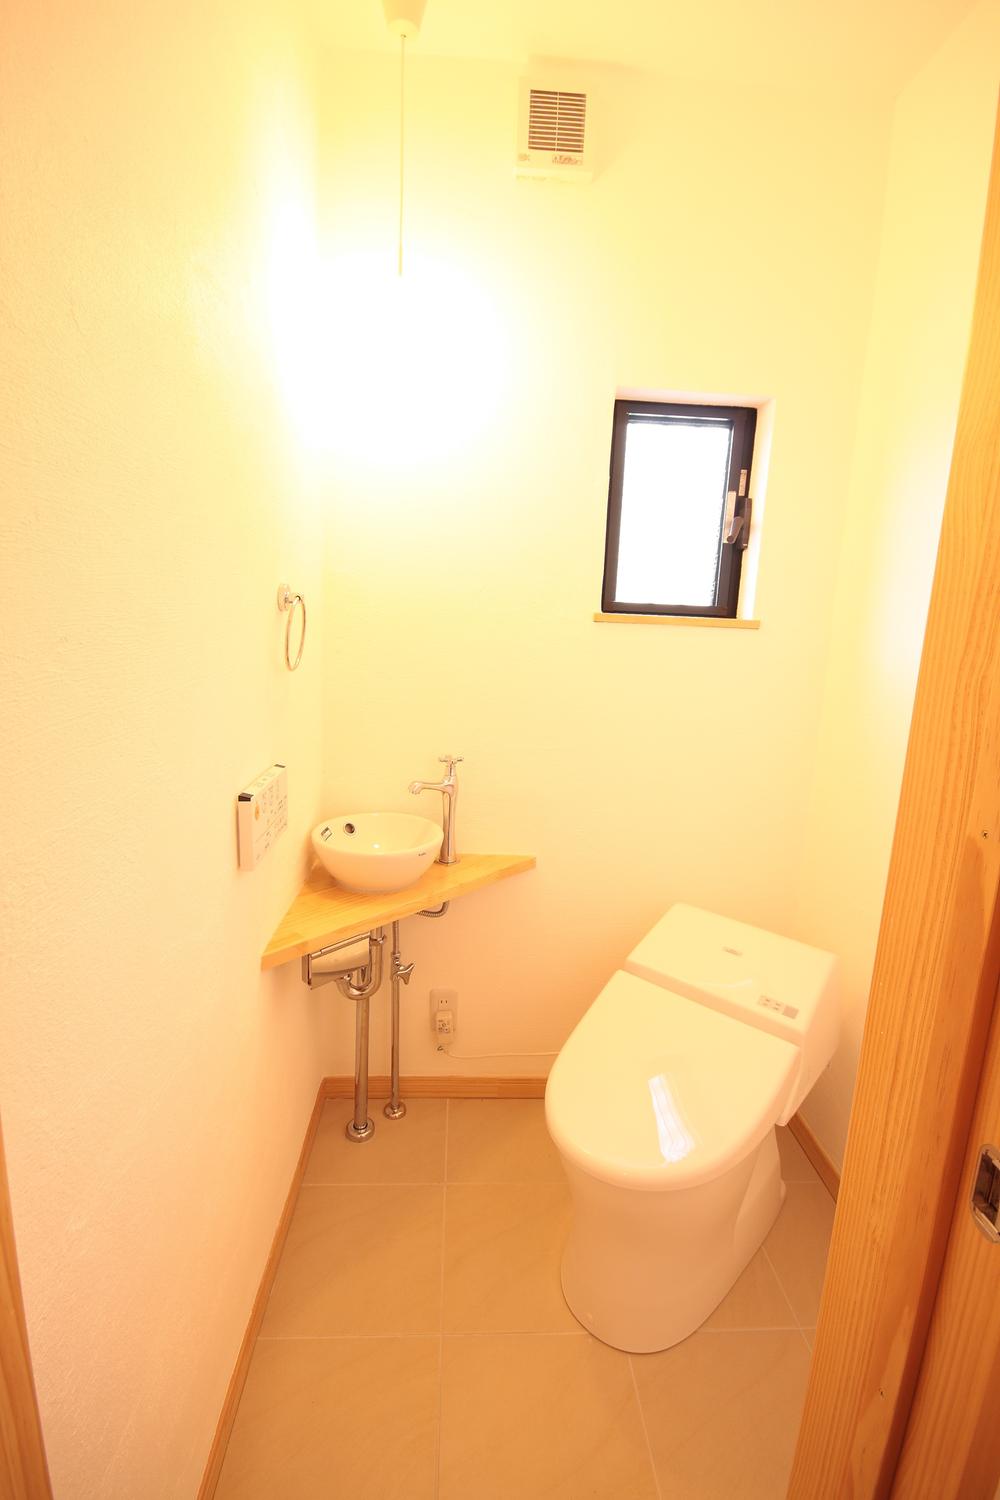 Toilet. Comfortable in the spacious toilet with hand-washing facilities